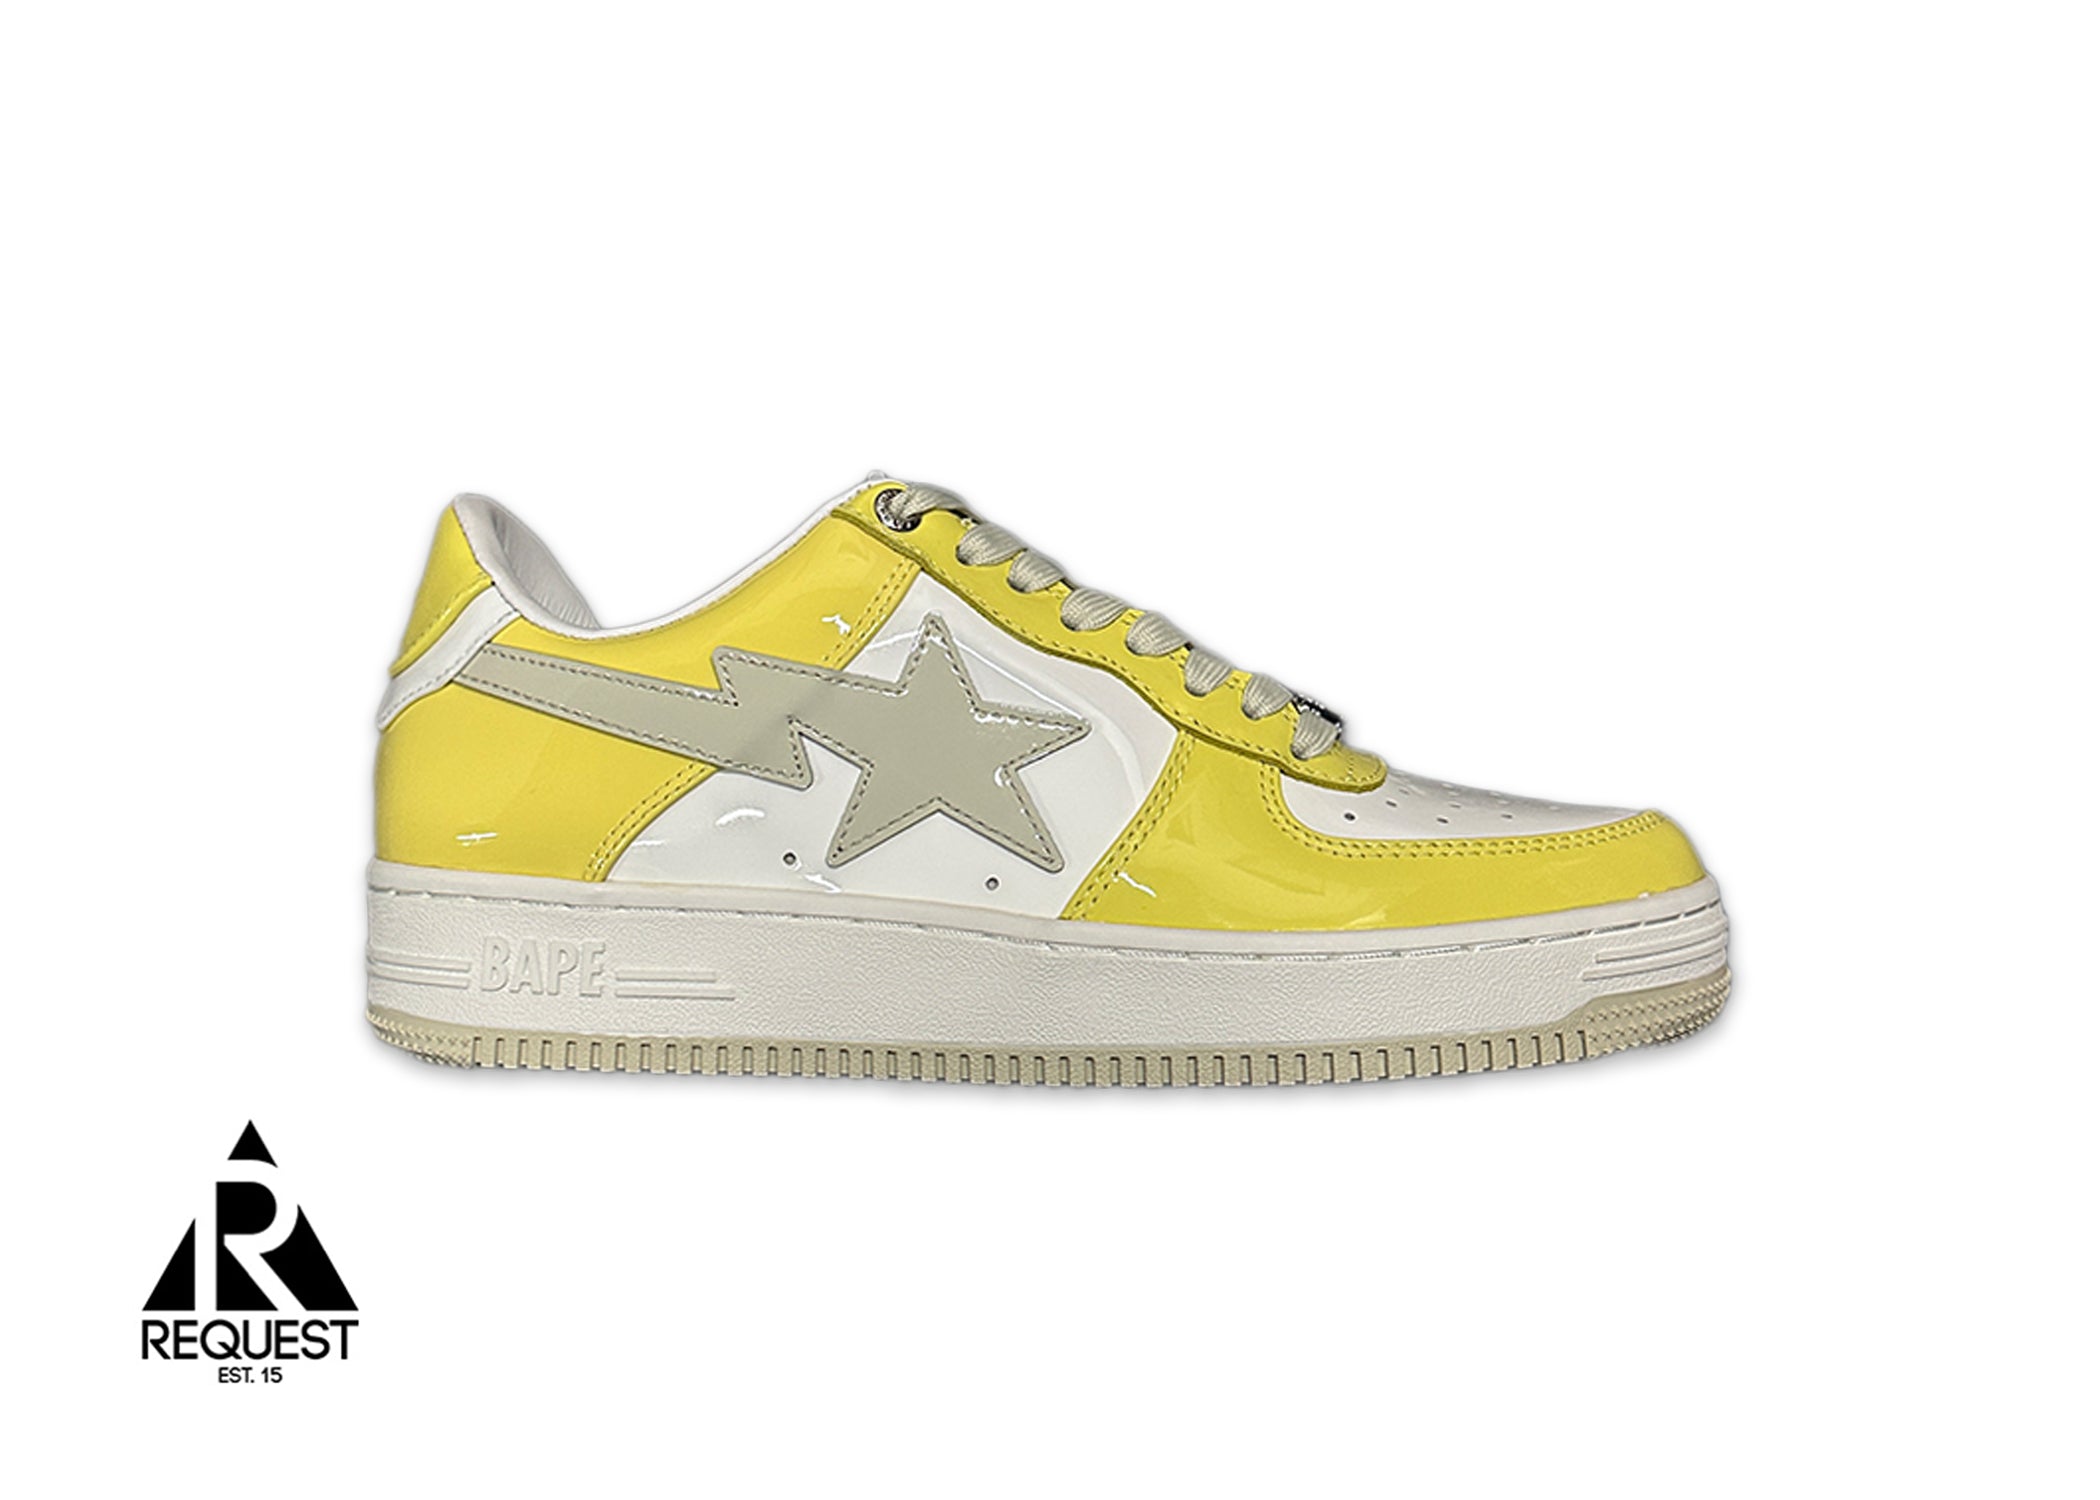 Bapesta Low “Patent Leather Beige Yellow"